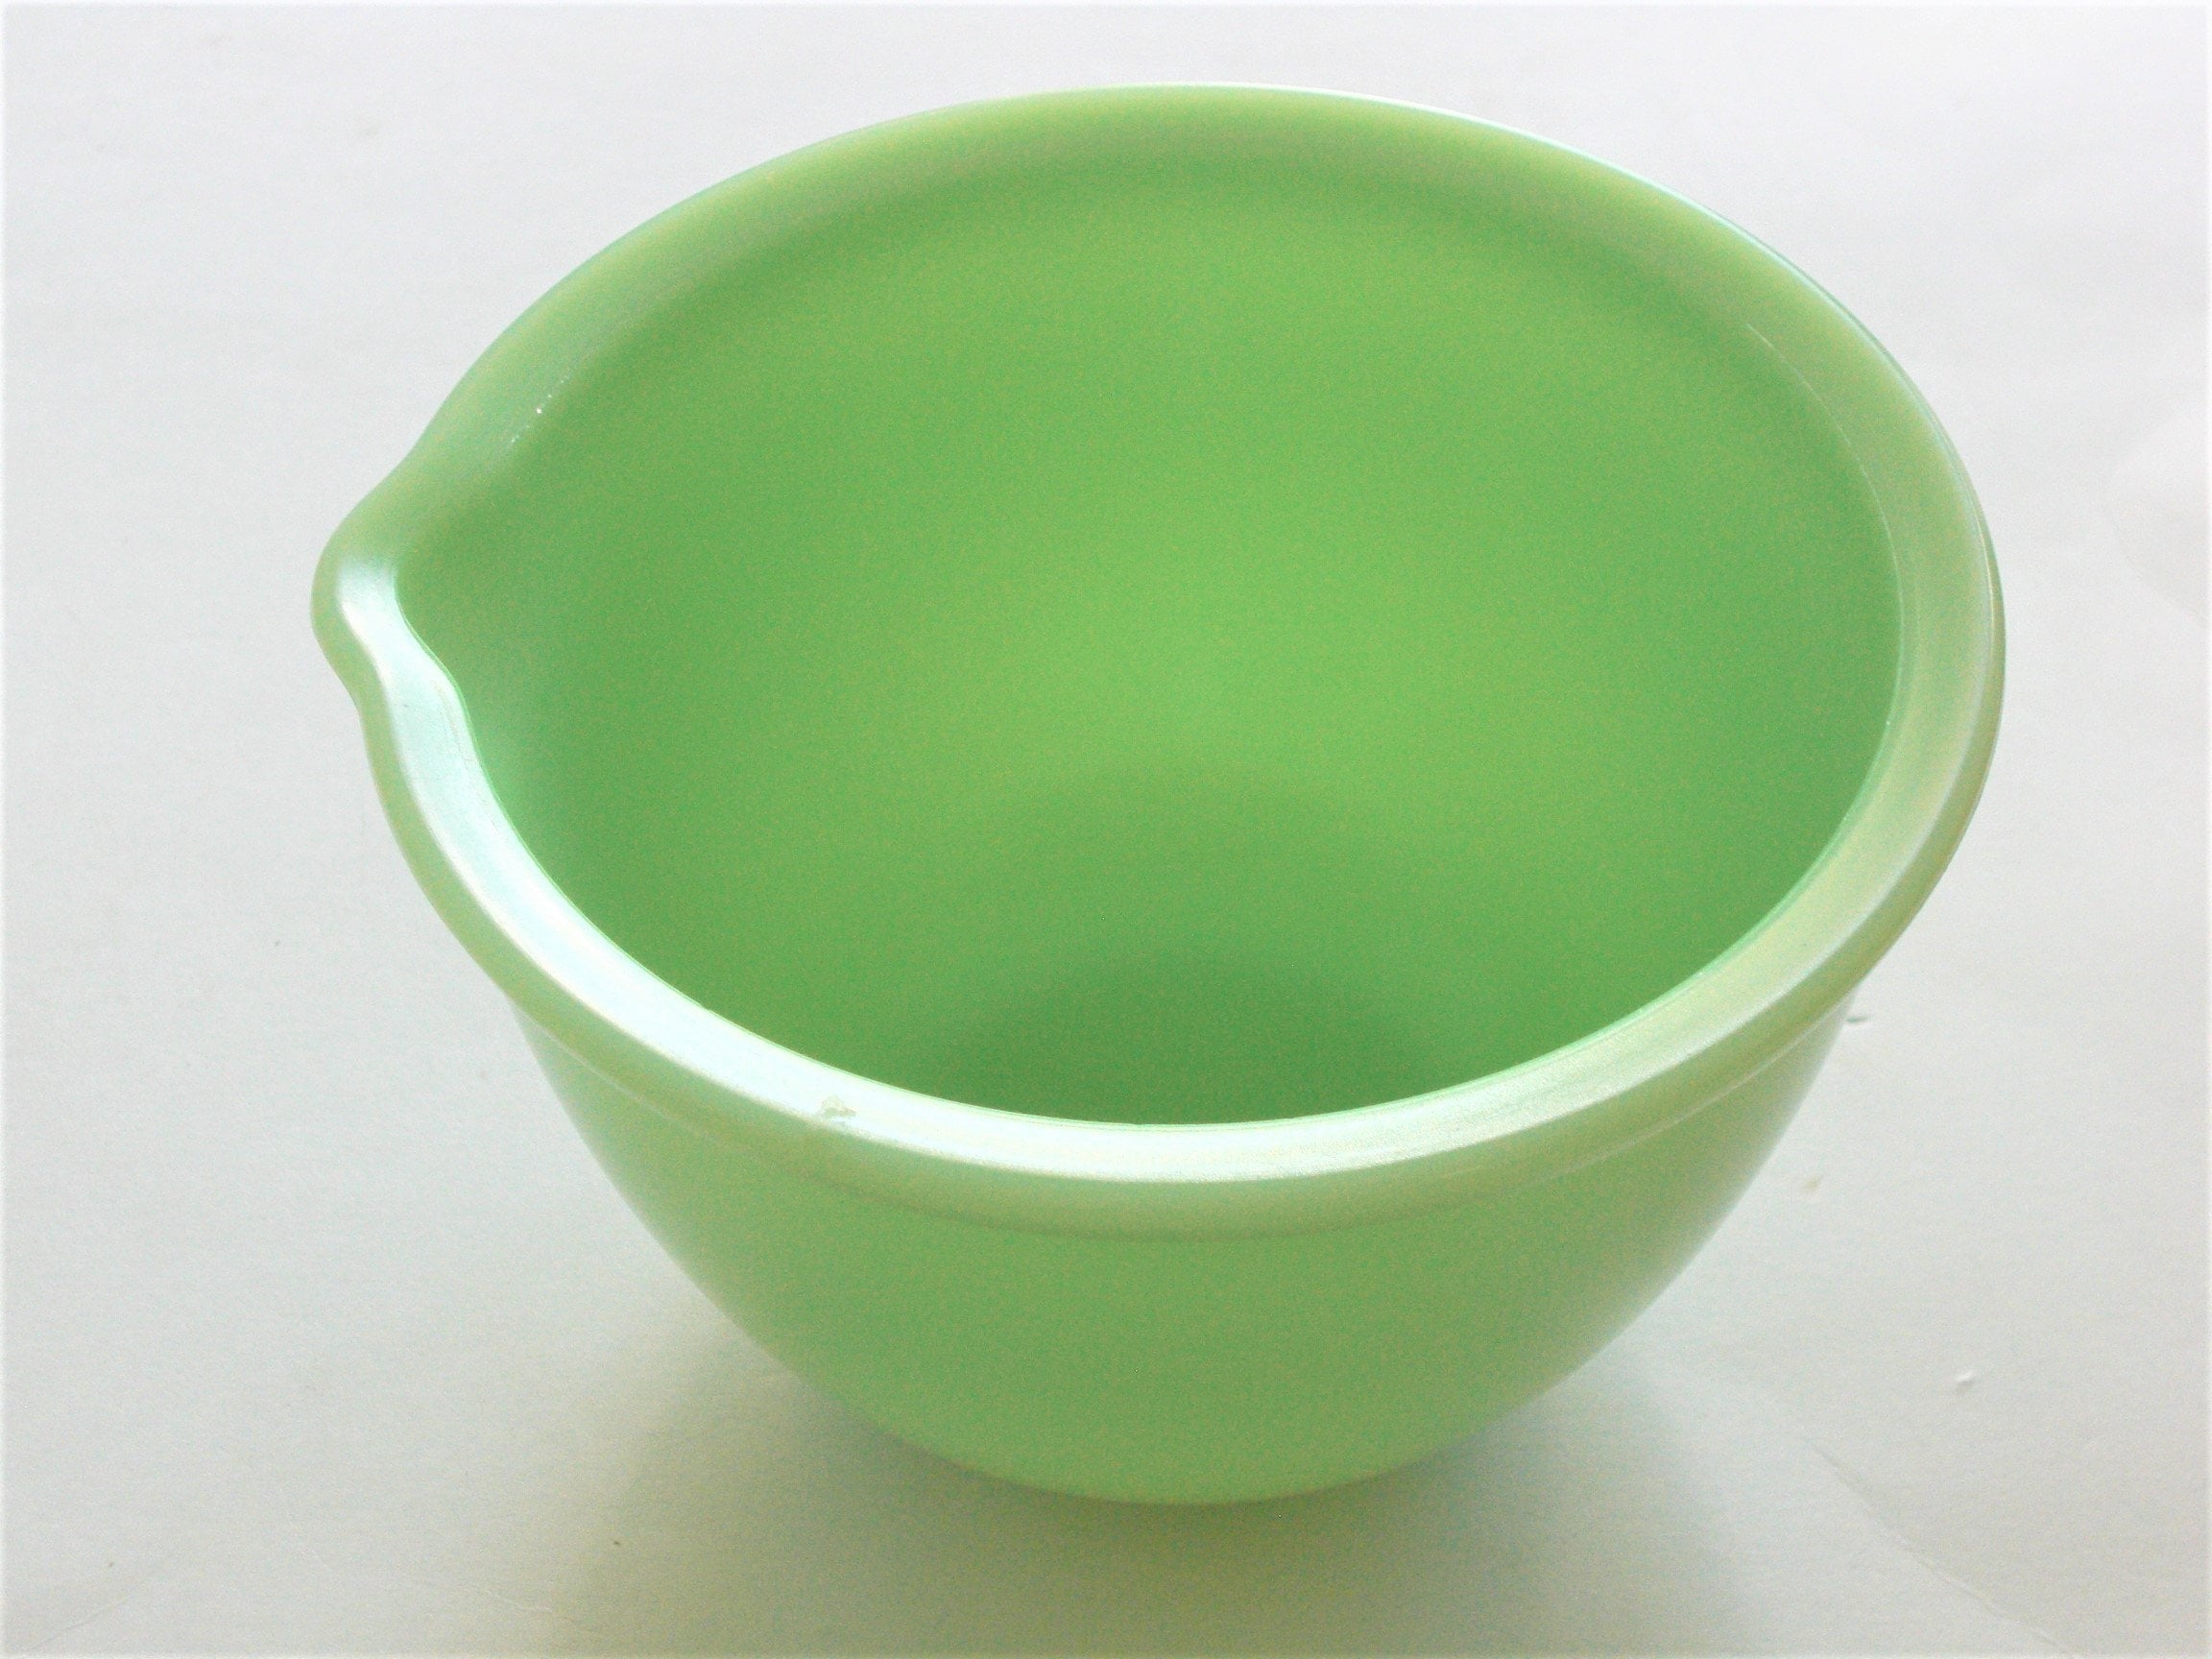 TUFGLAS GREEN Six Cup KITCHEN MIXING BOWL with Handle.. Depression Glass